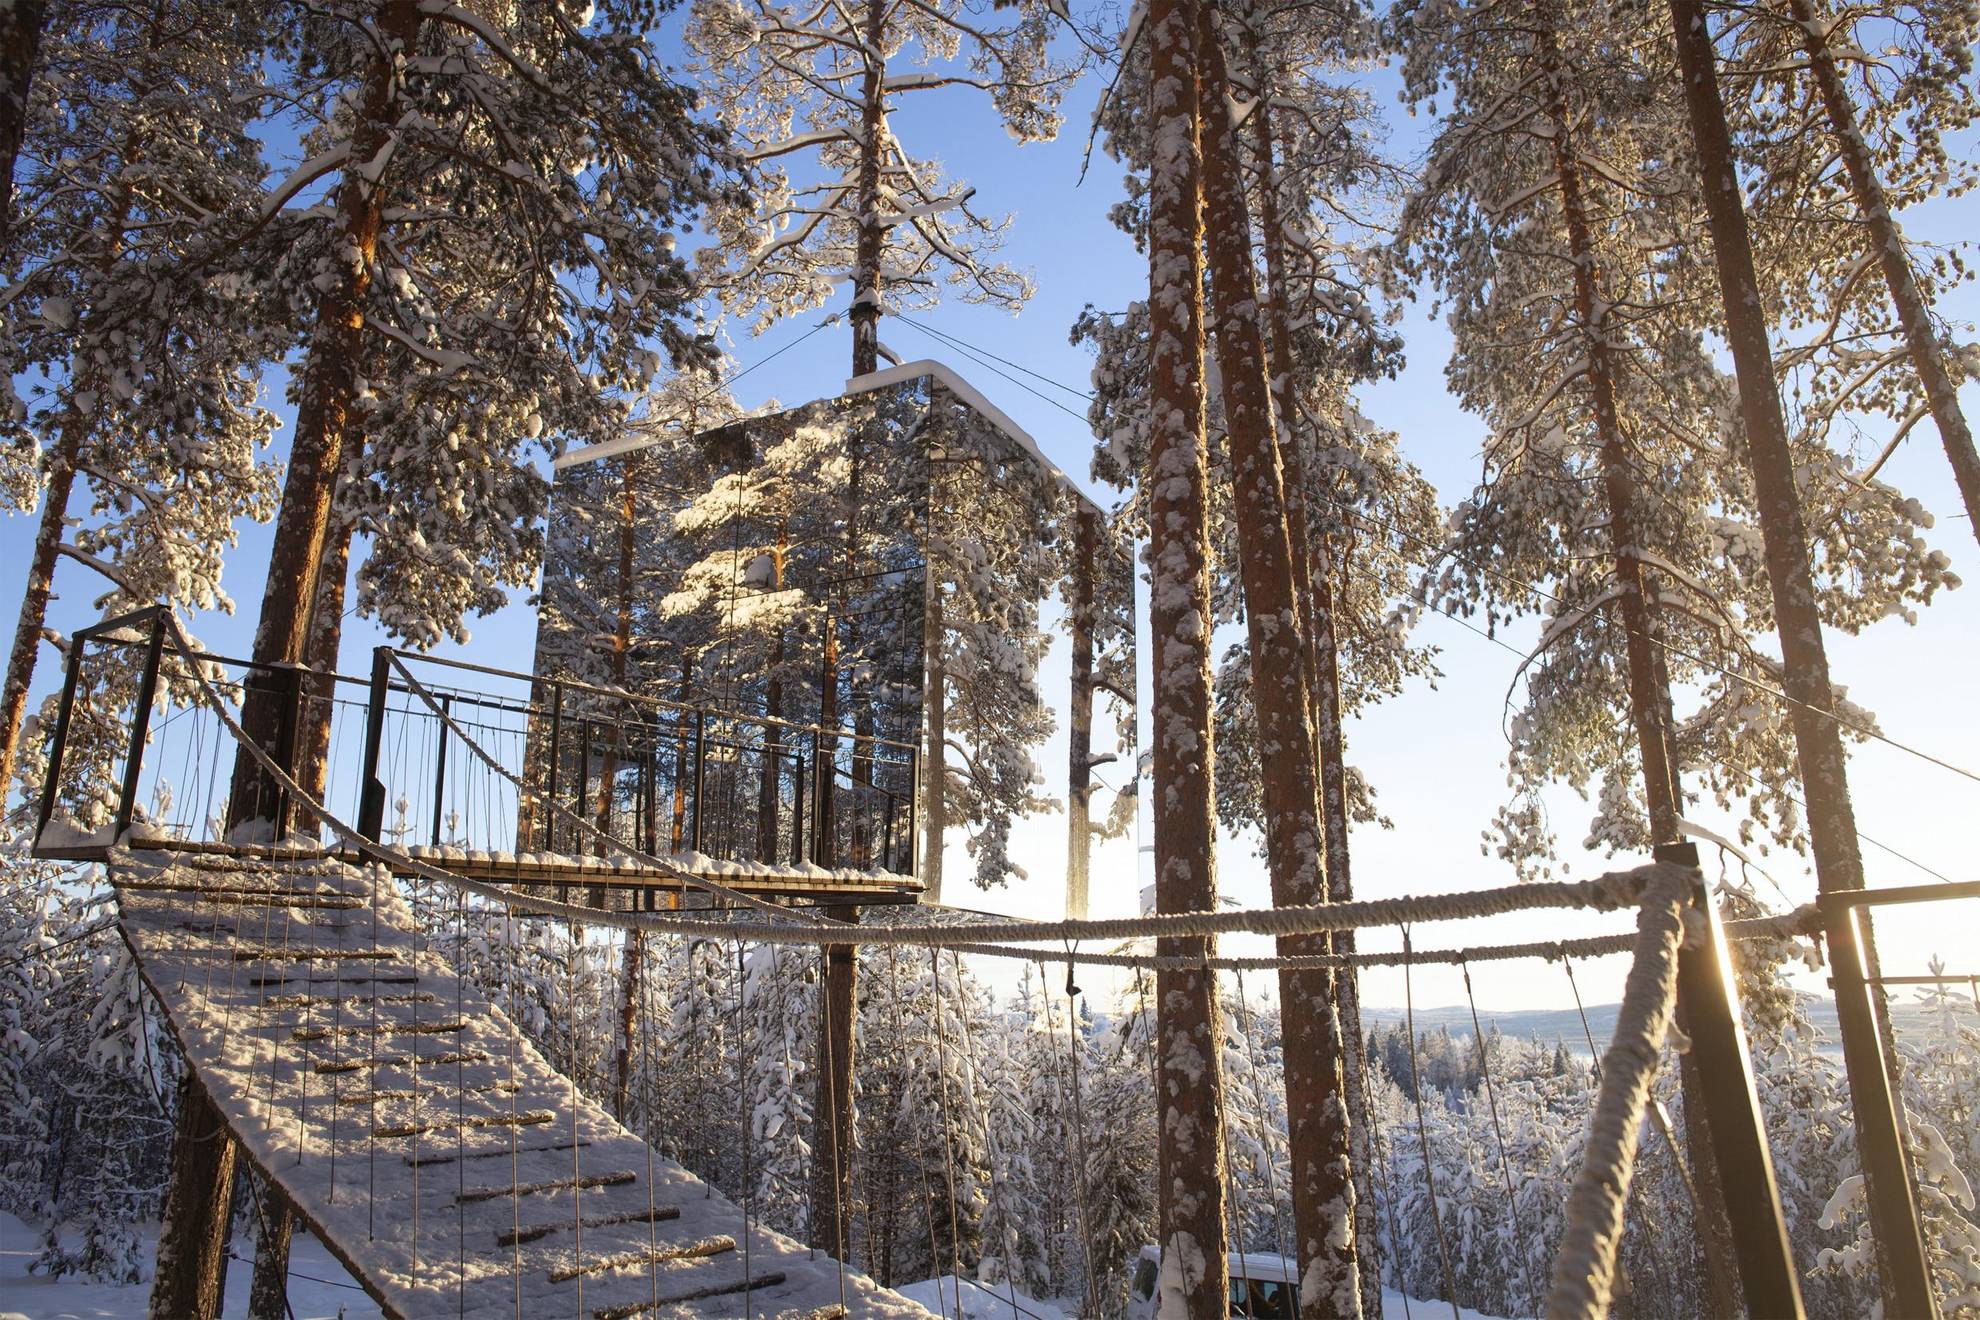 The tree hotel made of mirror glass, set in a snowy forest in Swedish Lapland.